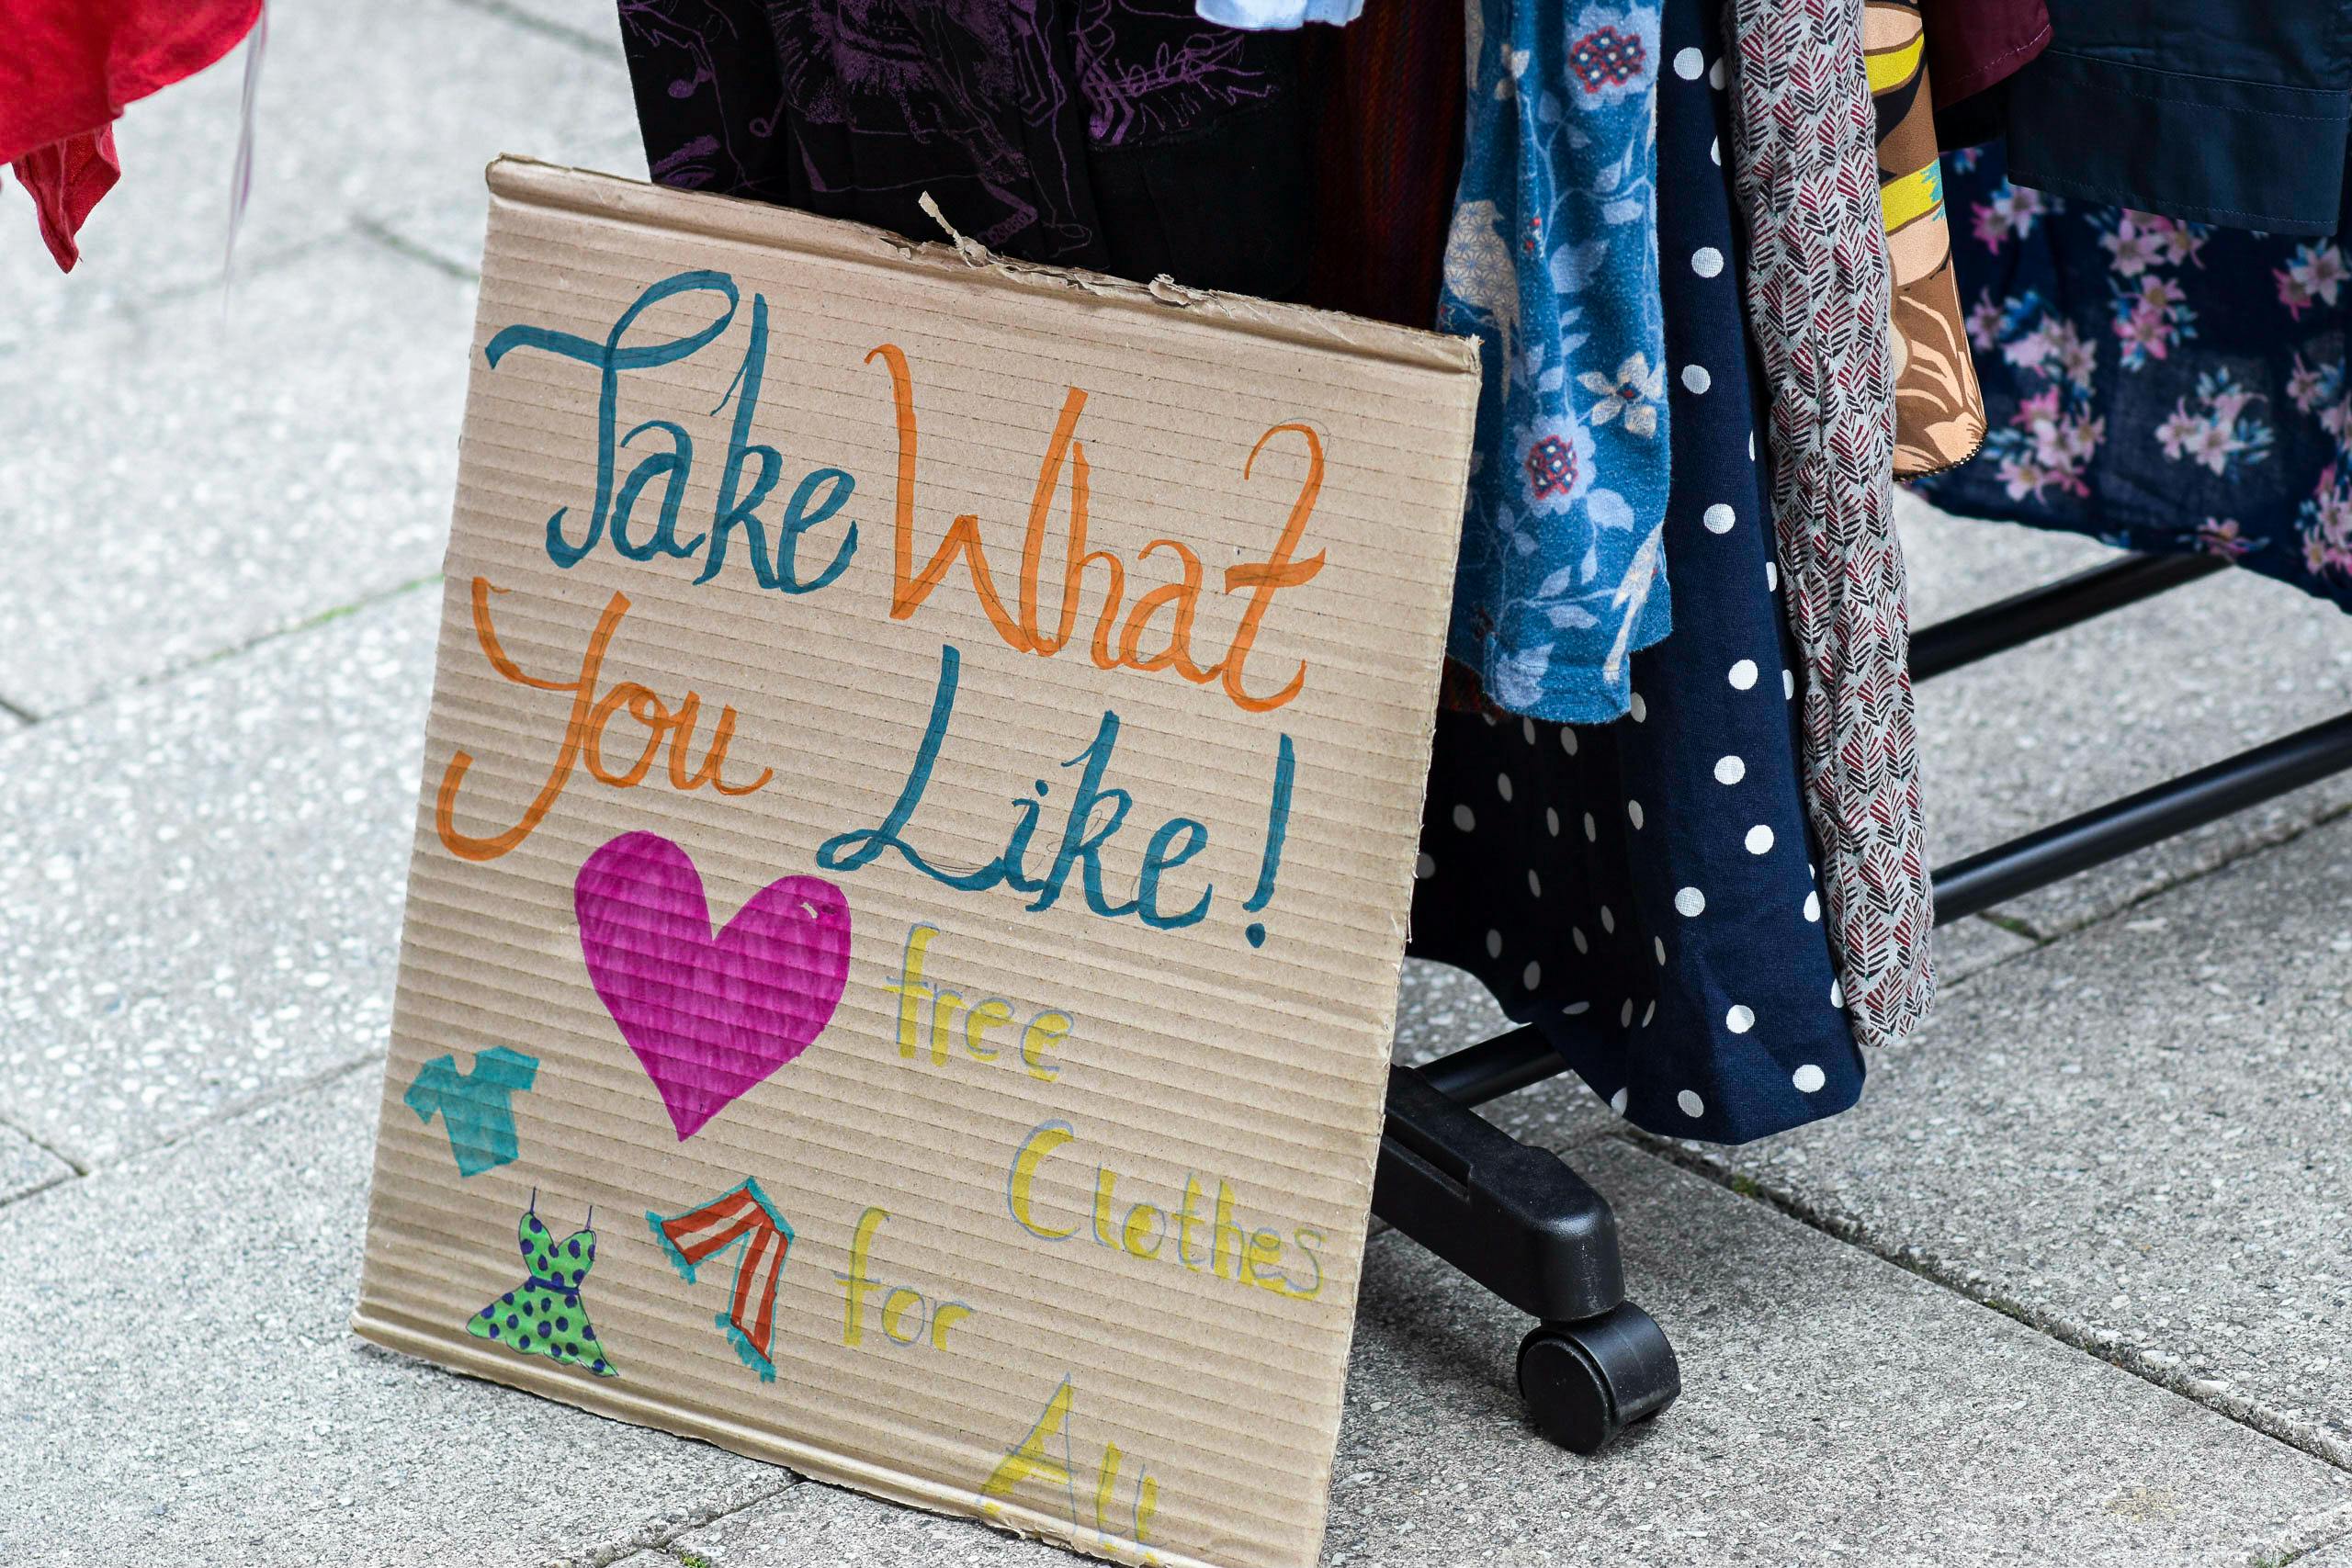 A sign saying "take what you like - free clothes for all" on the street next to a rack of free clothes.